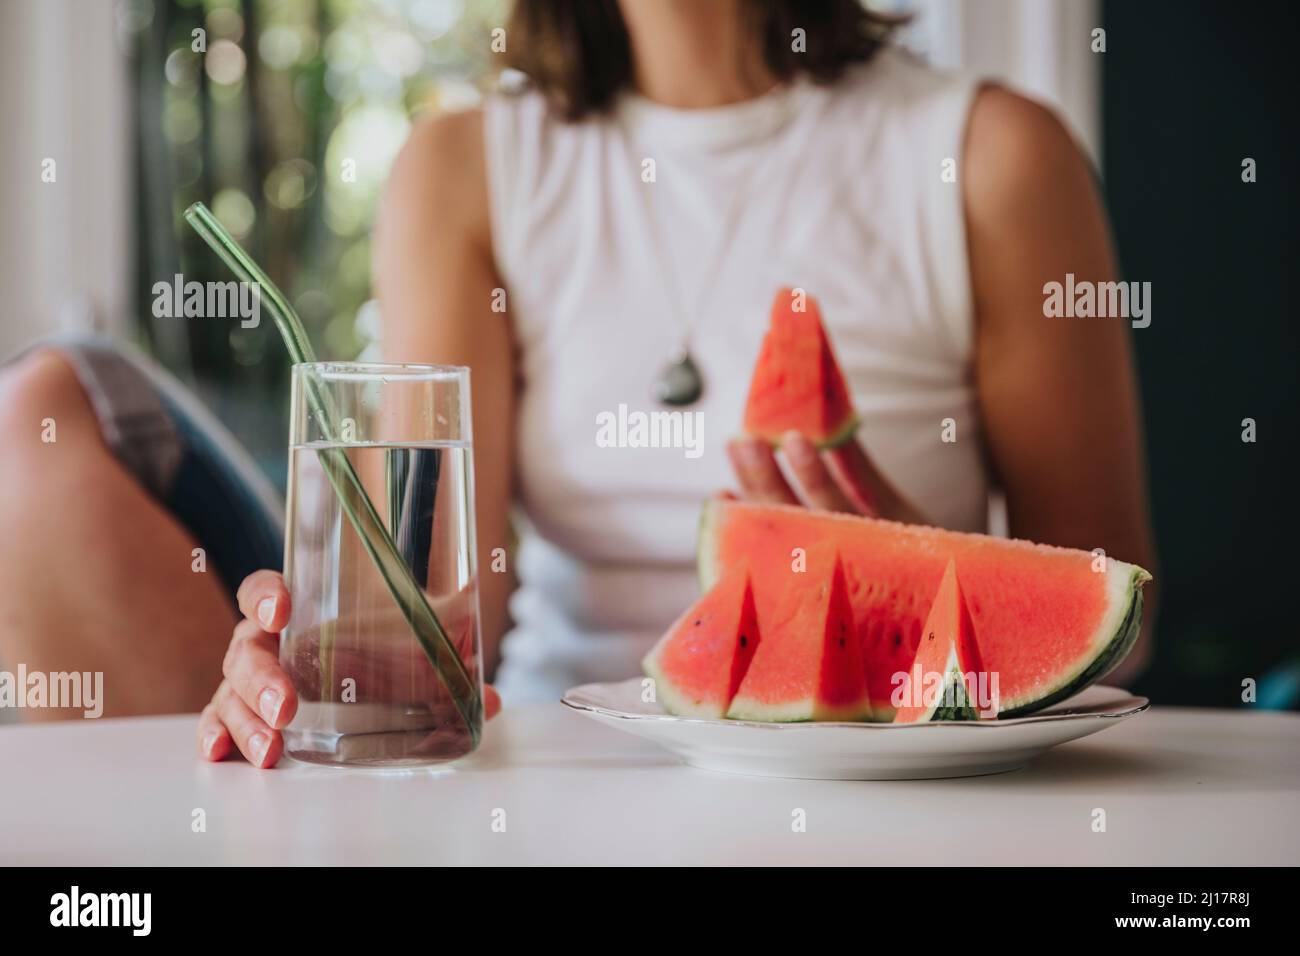 Woman holding drinking glass by watermelon slice in plate on table at home Stock Photo